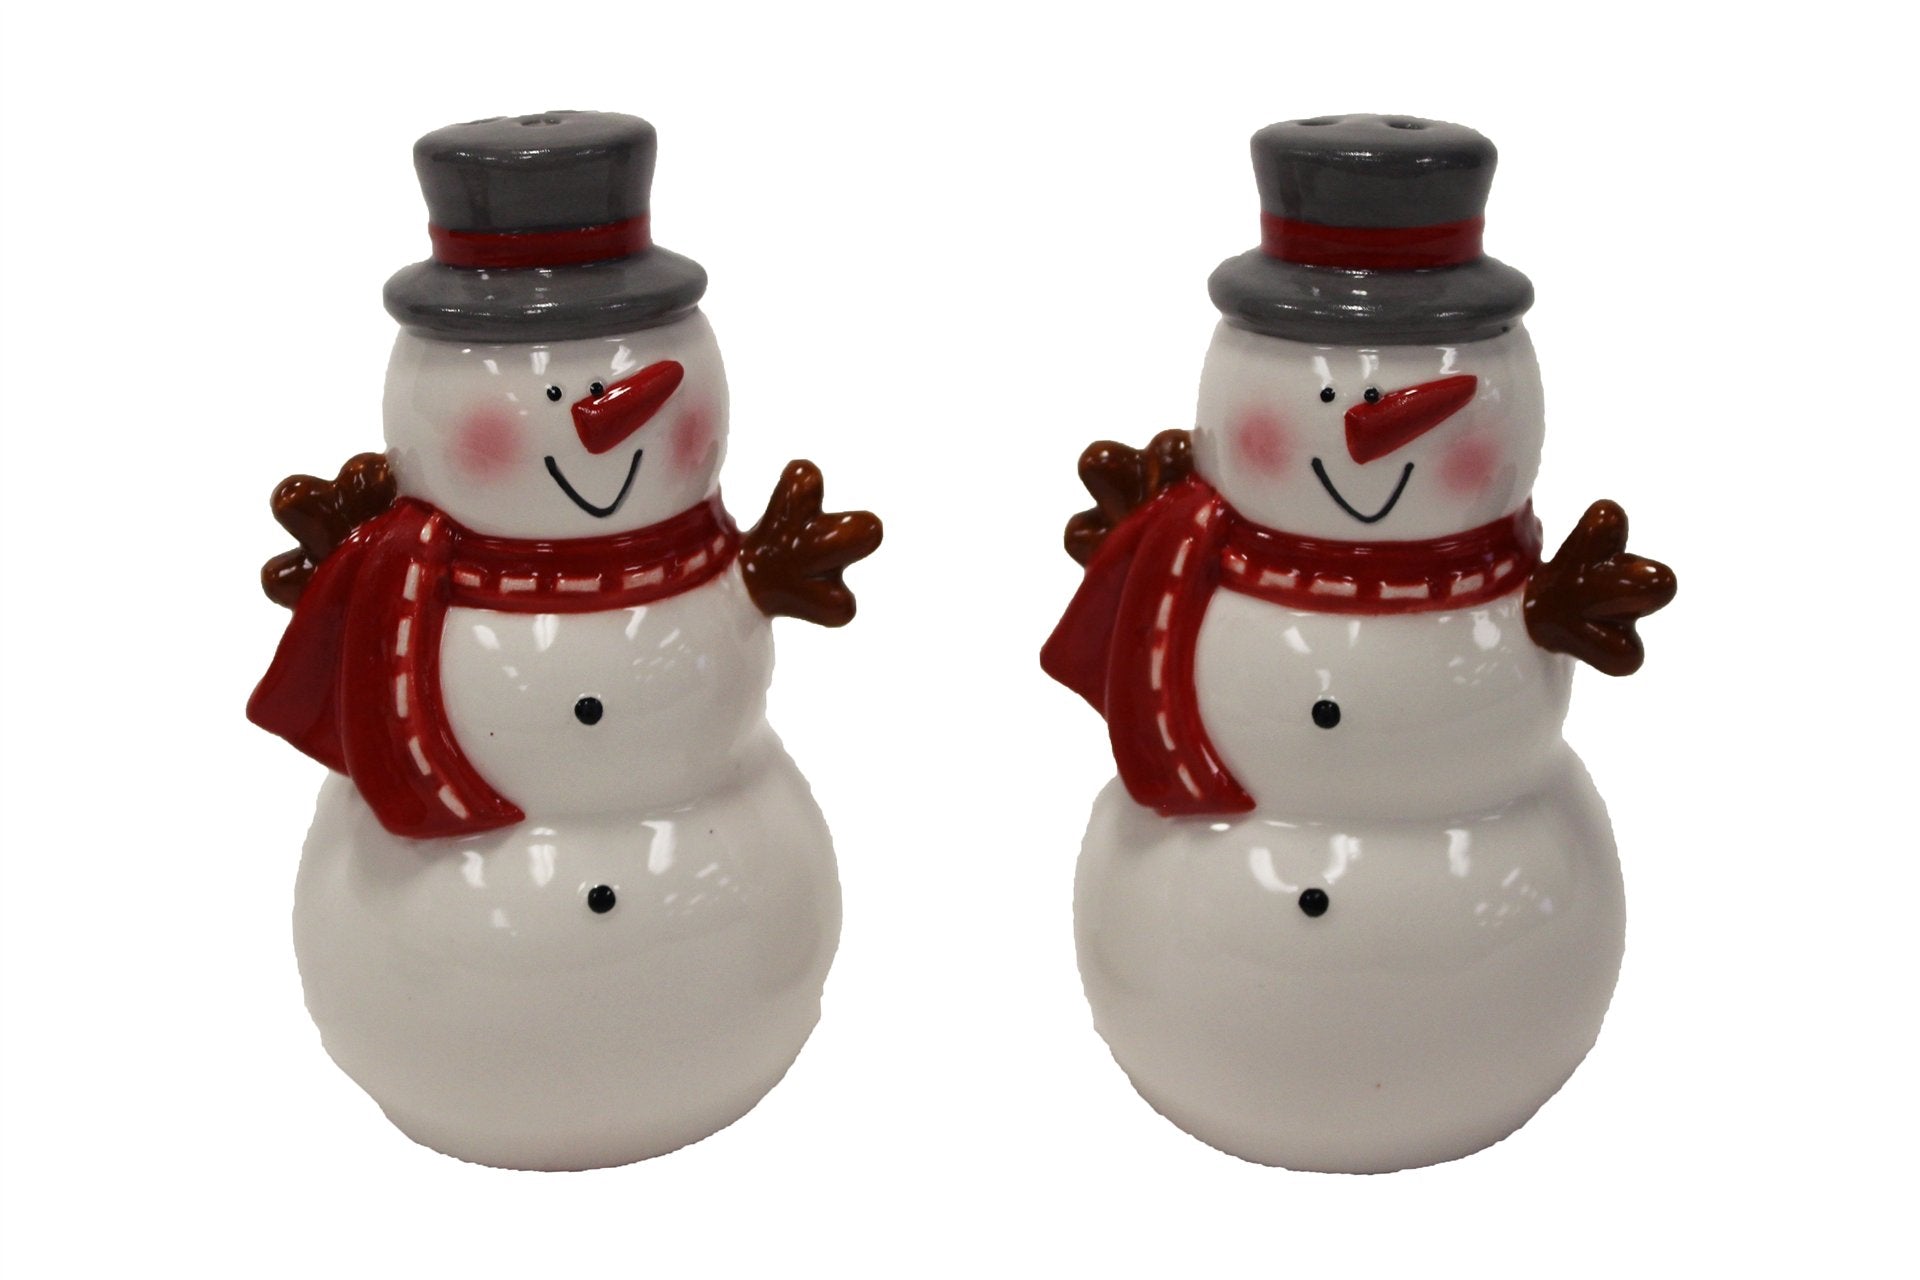 Snowman Salt and Pepper Shakers